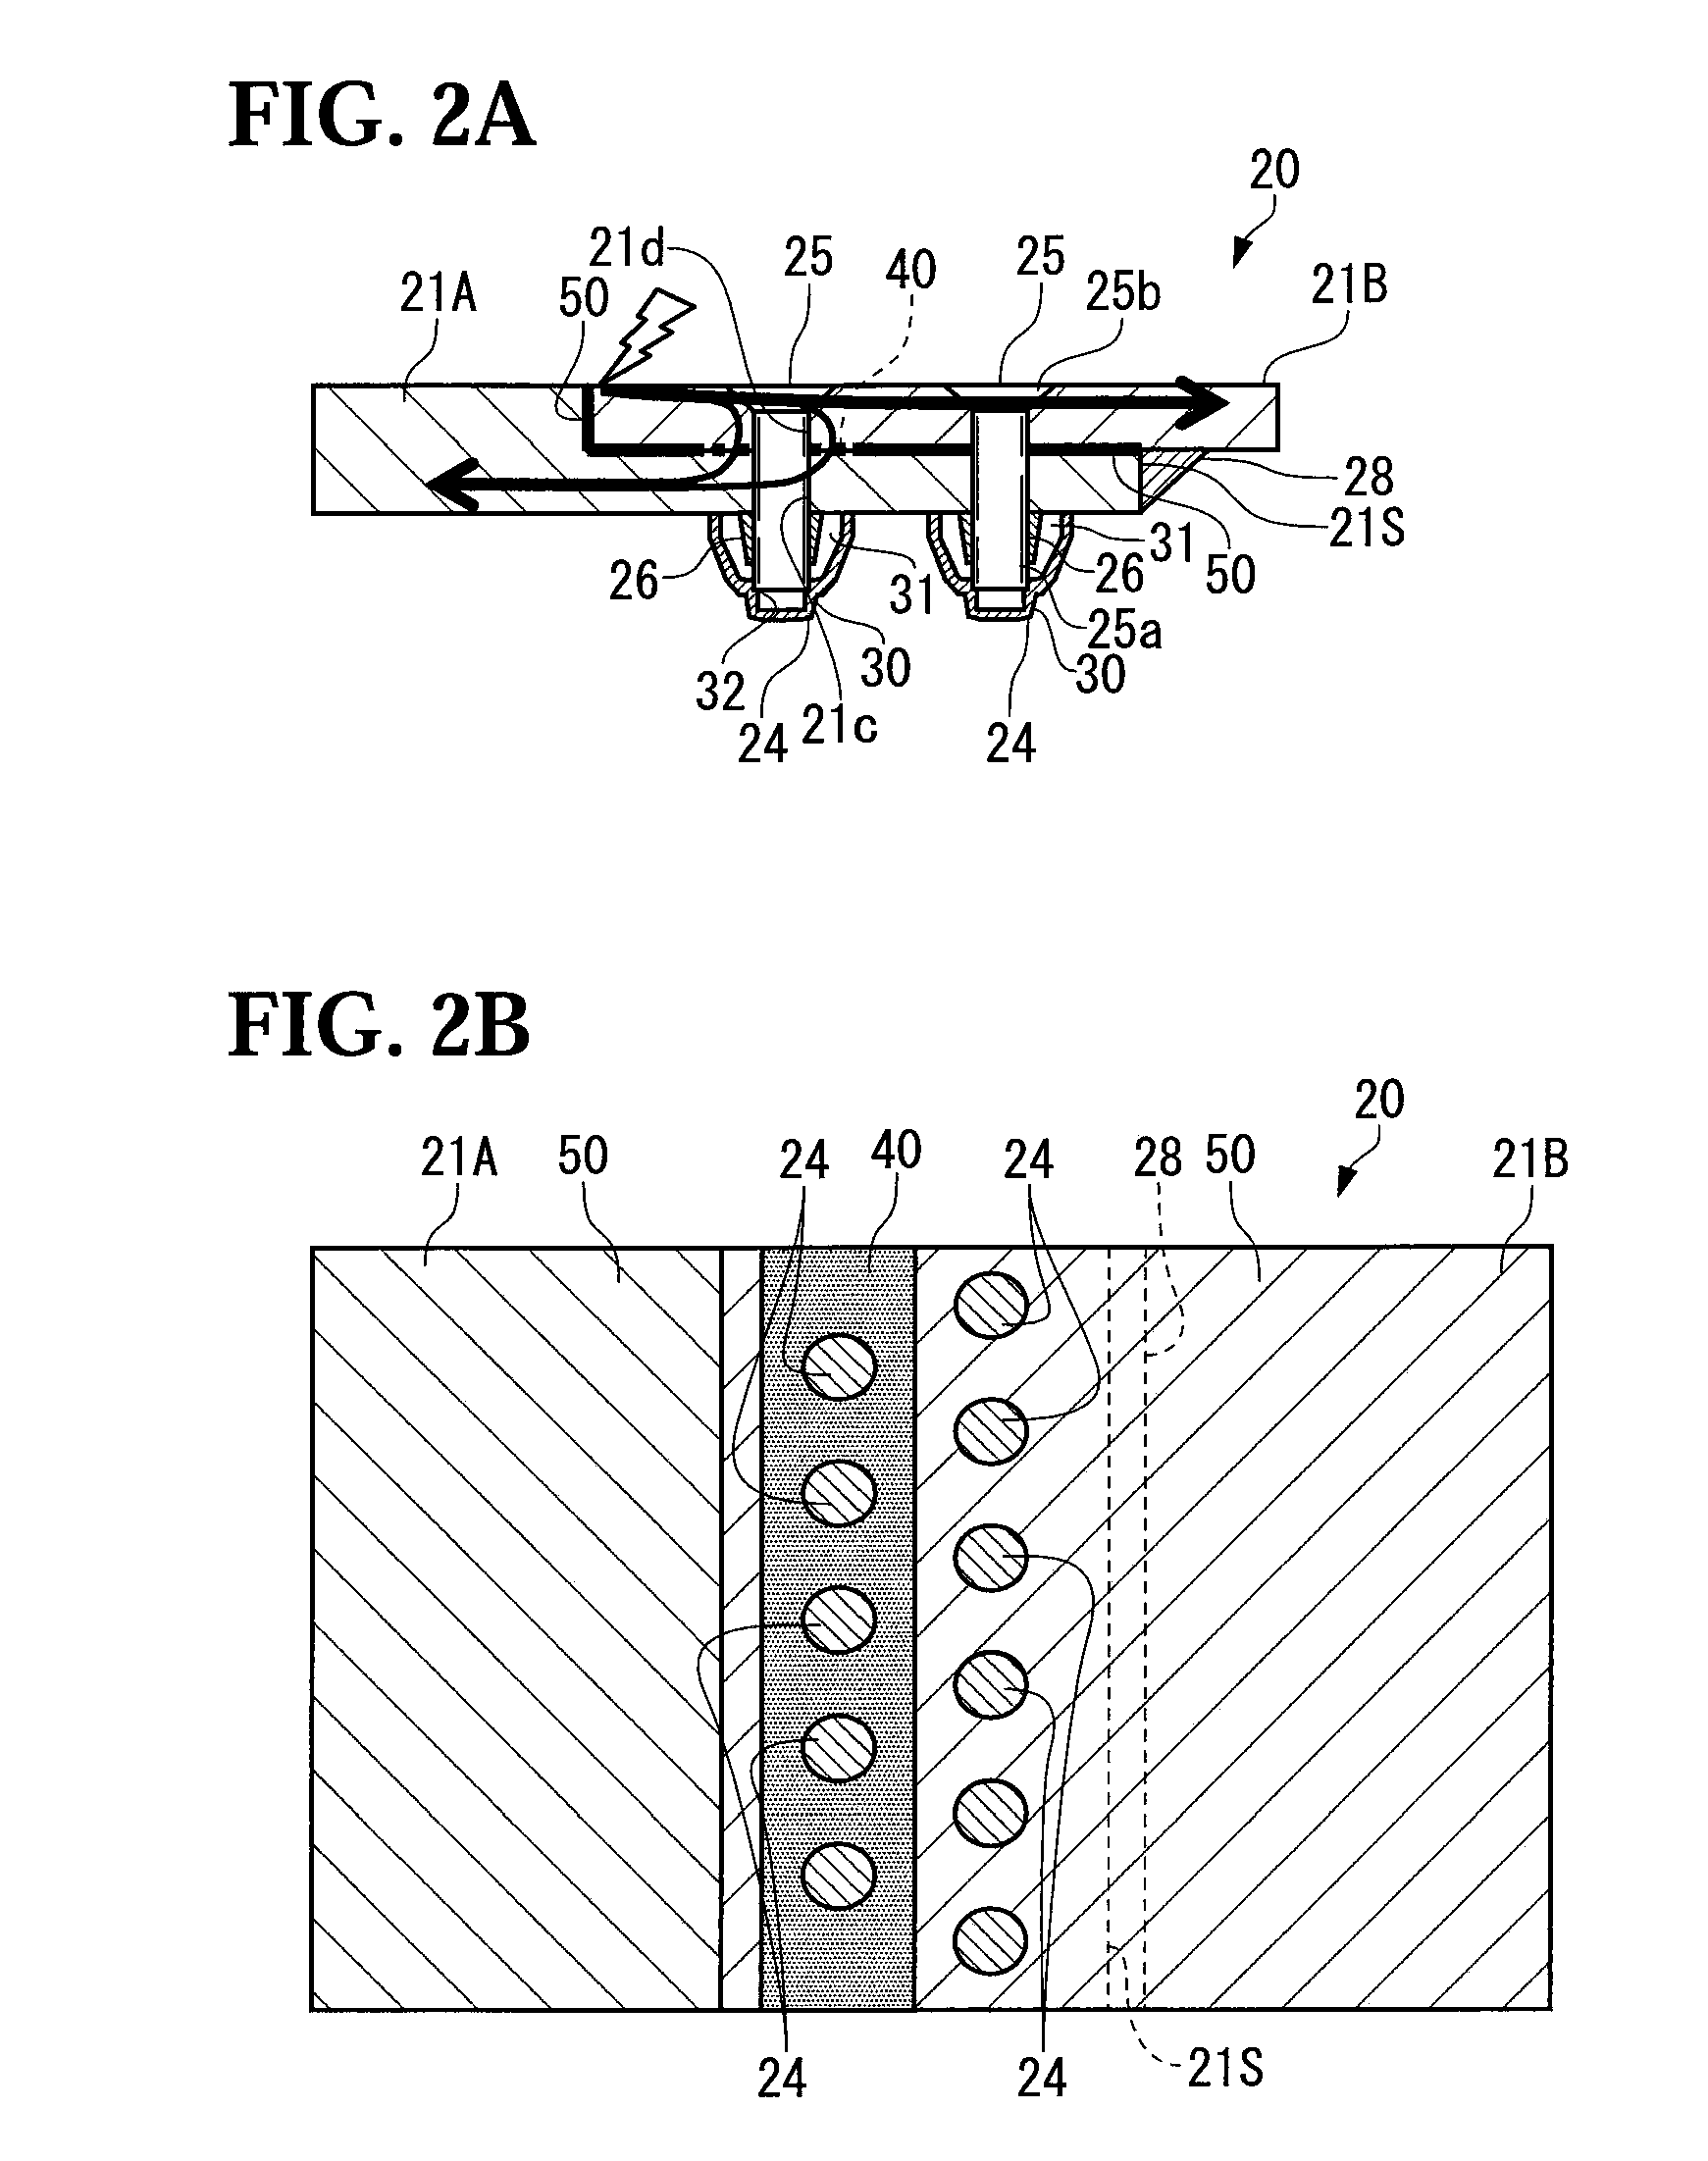 Coupling structure for airframe components